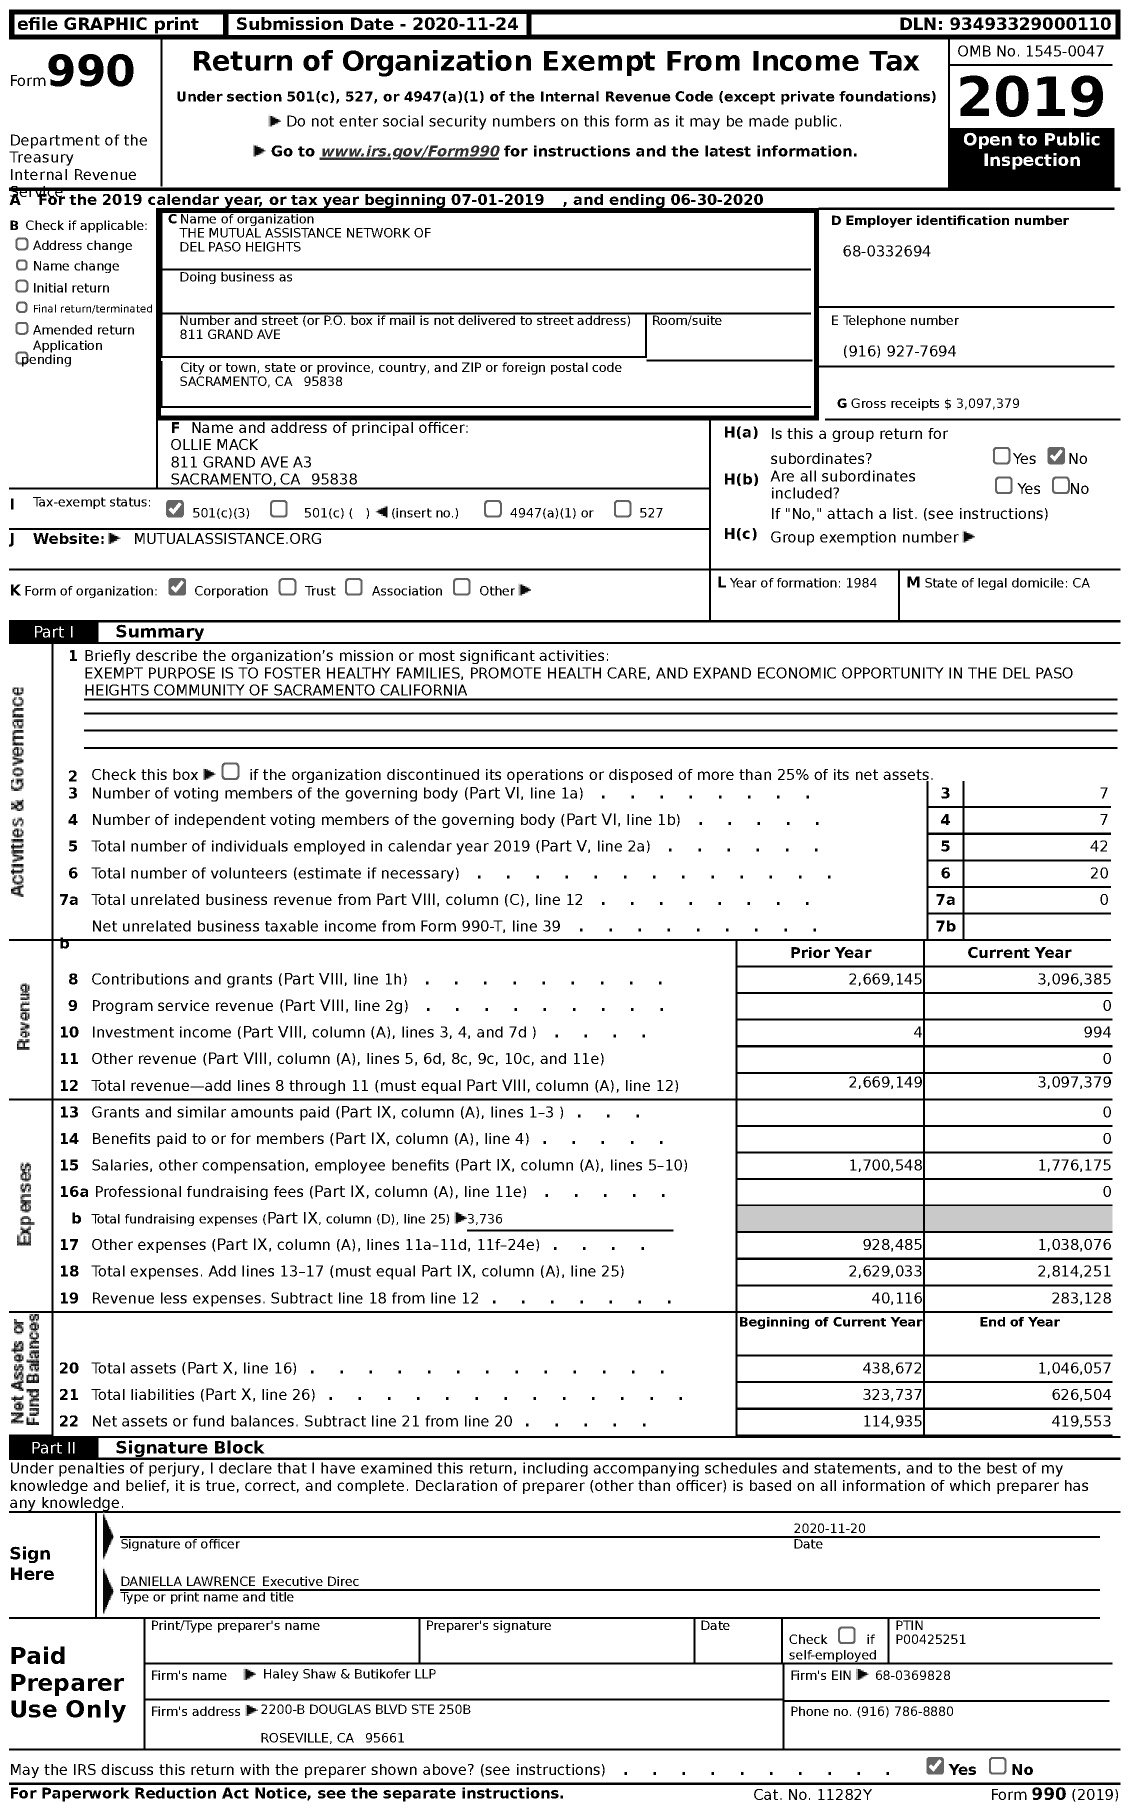 Image of first page of 2019 Form 990 for Mutual Assistance Network of Del Paso Heights